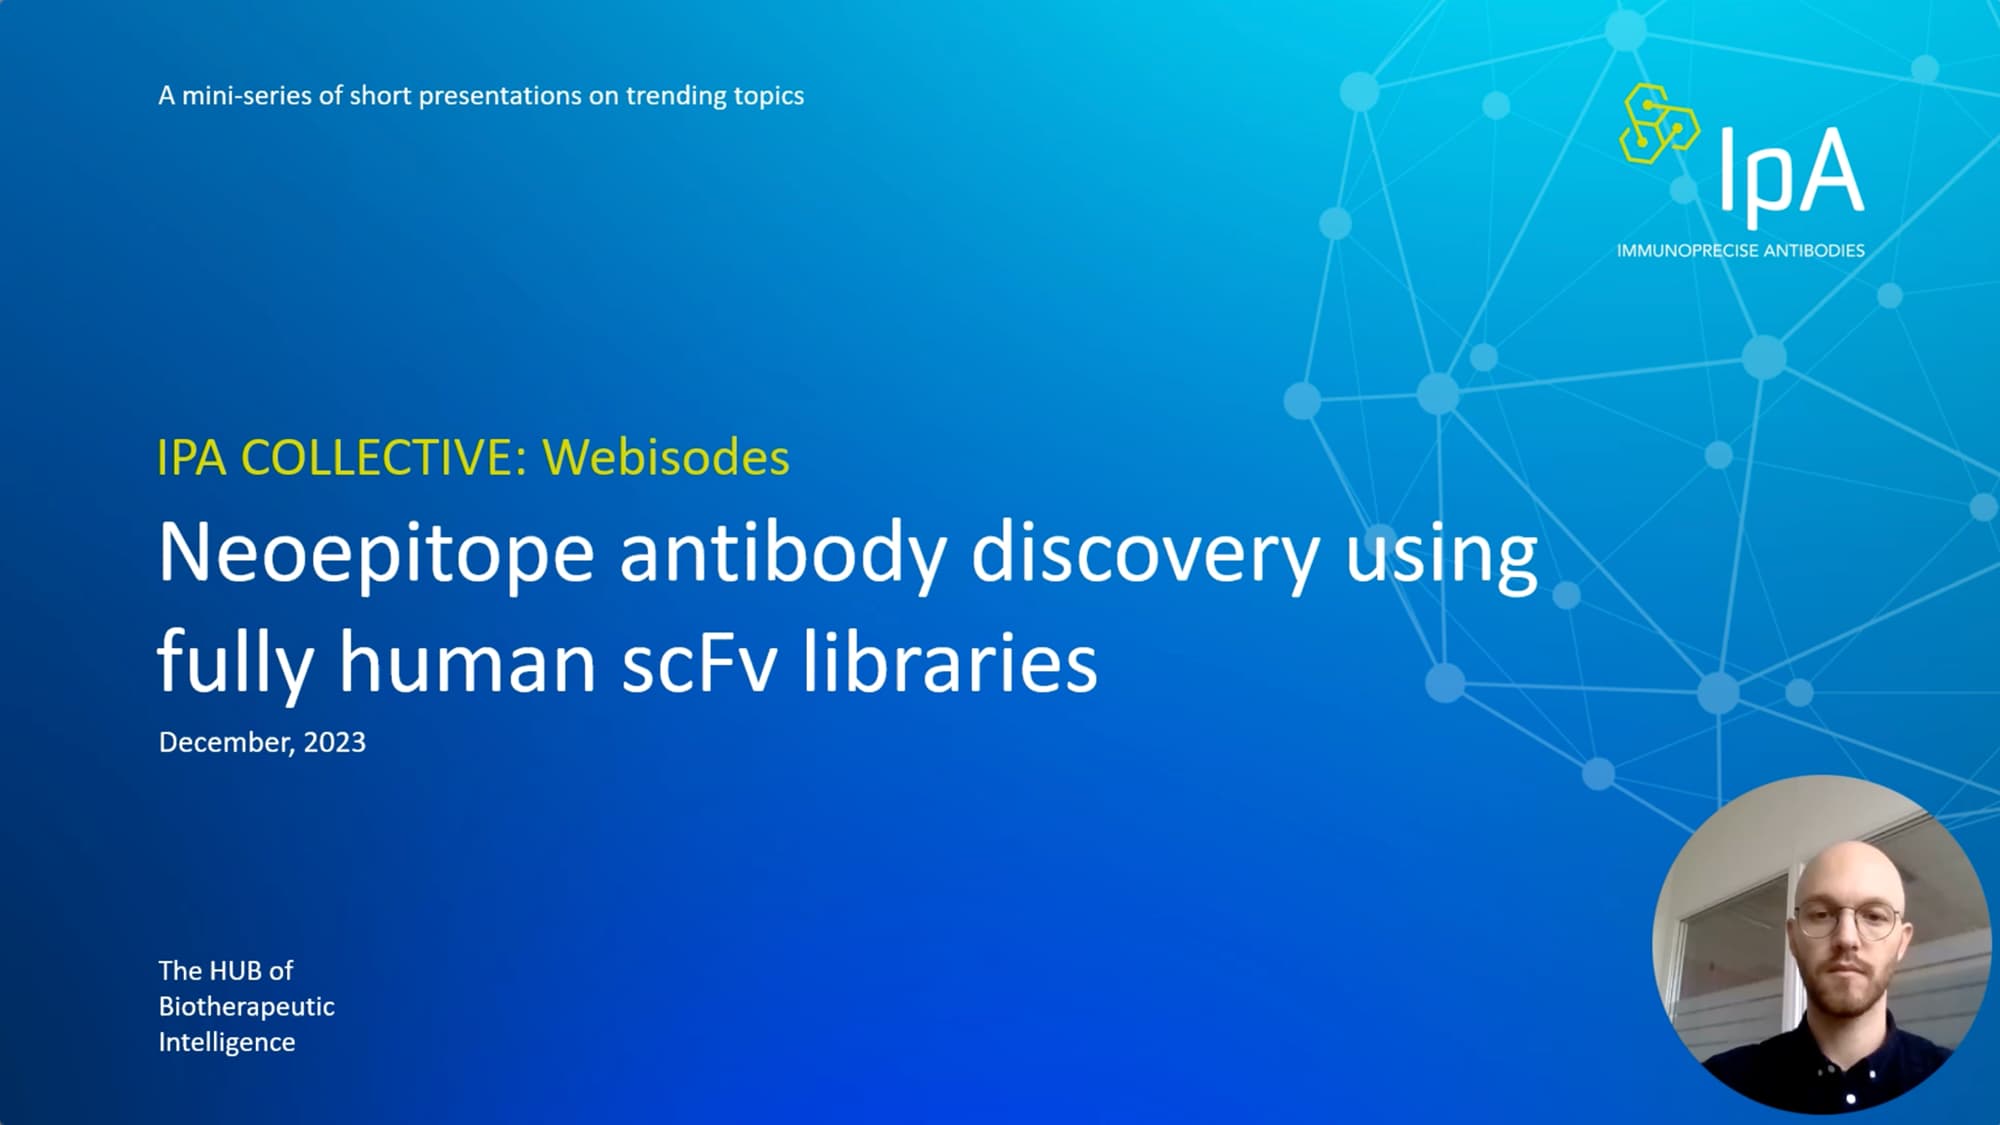 Neoepitope antibody discovery using fully human scFv libraries